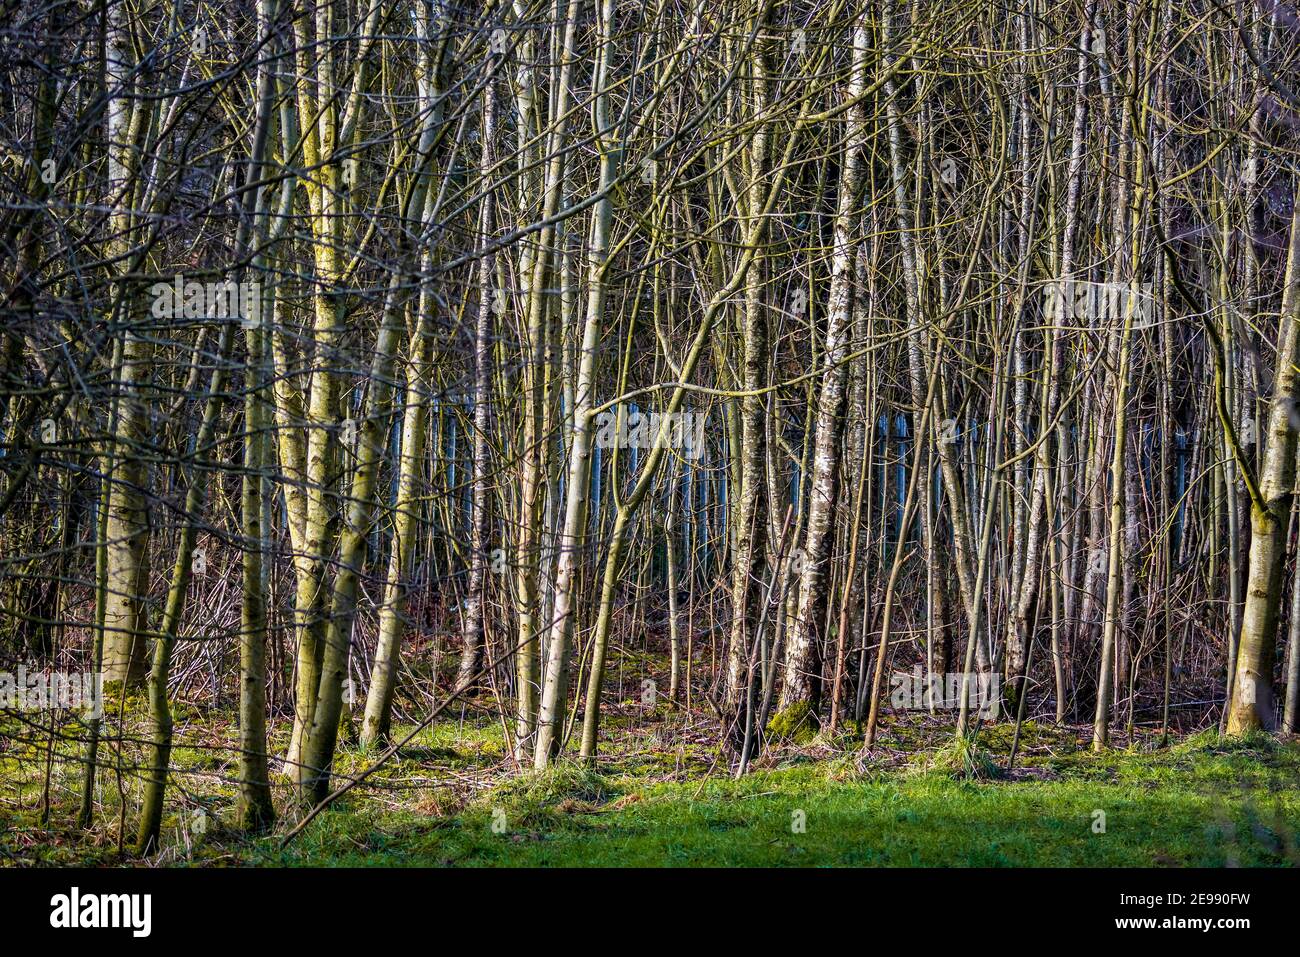 A woodland coppice of birch trees. Stock Photo